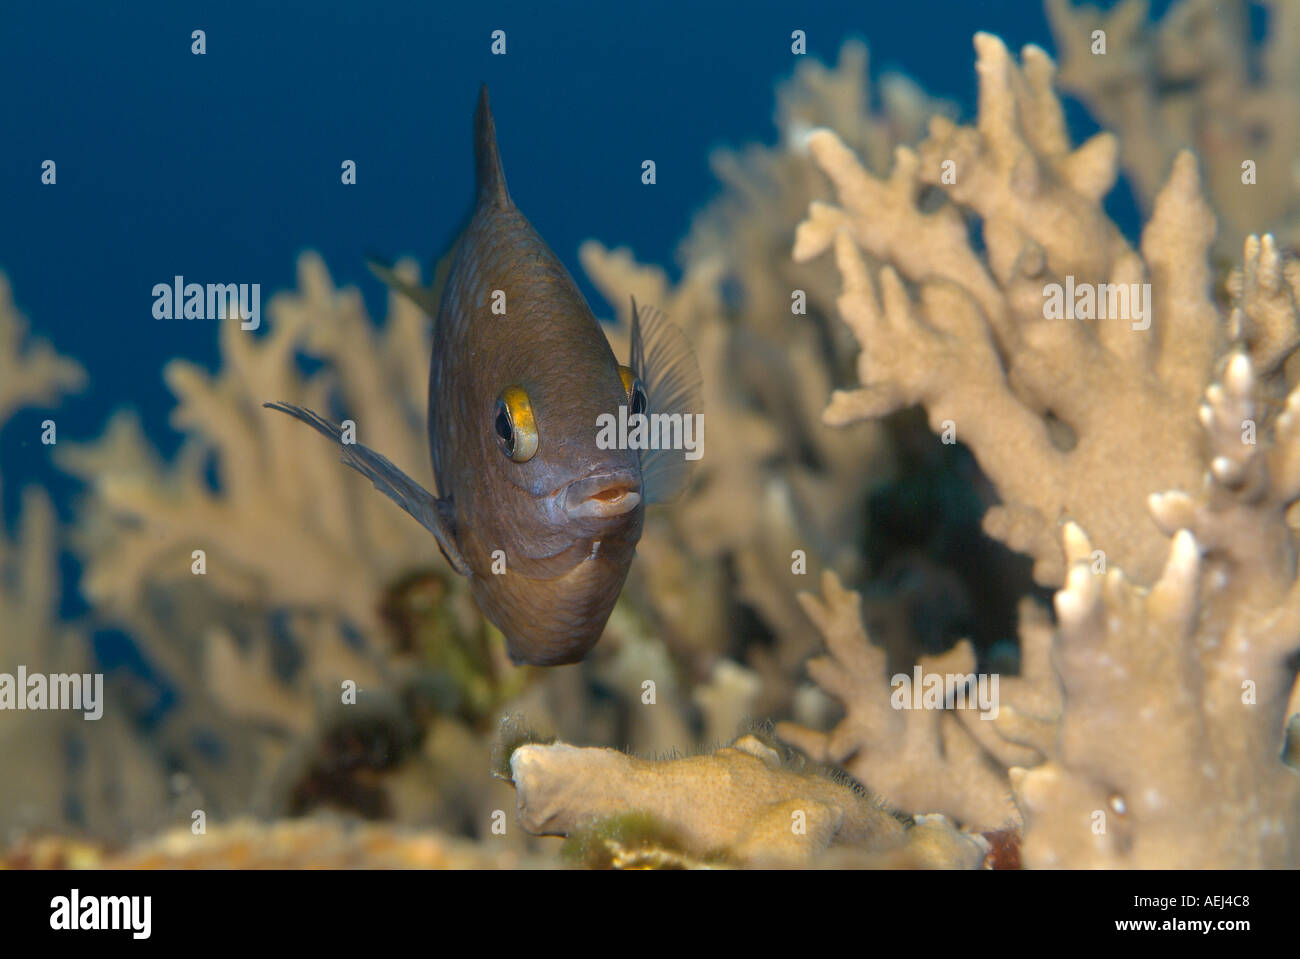 Cocoa damselfish in the Gulf of Mexico, off Texas Stock Photo